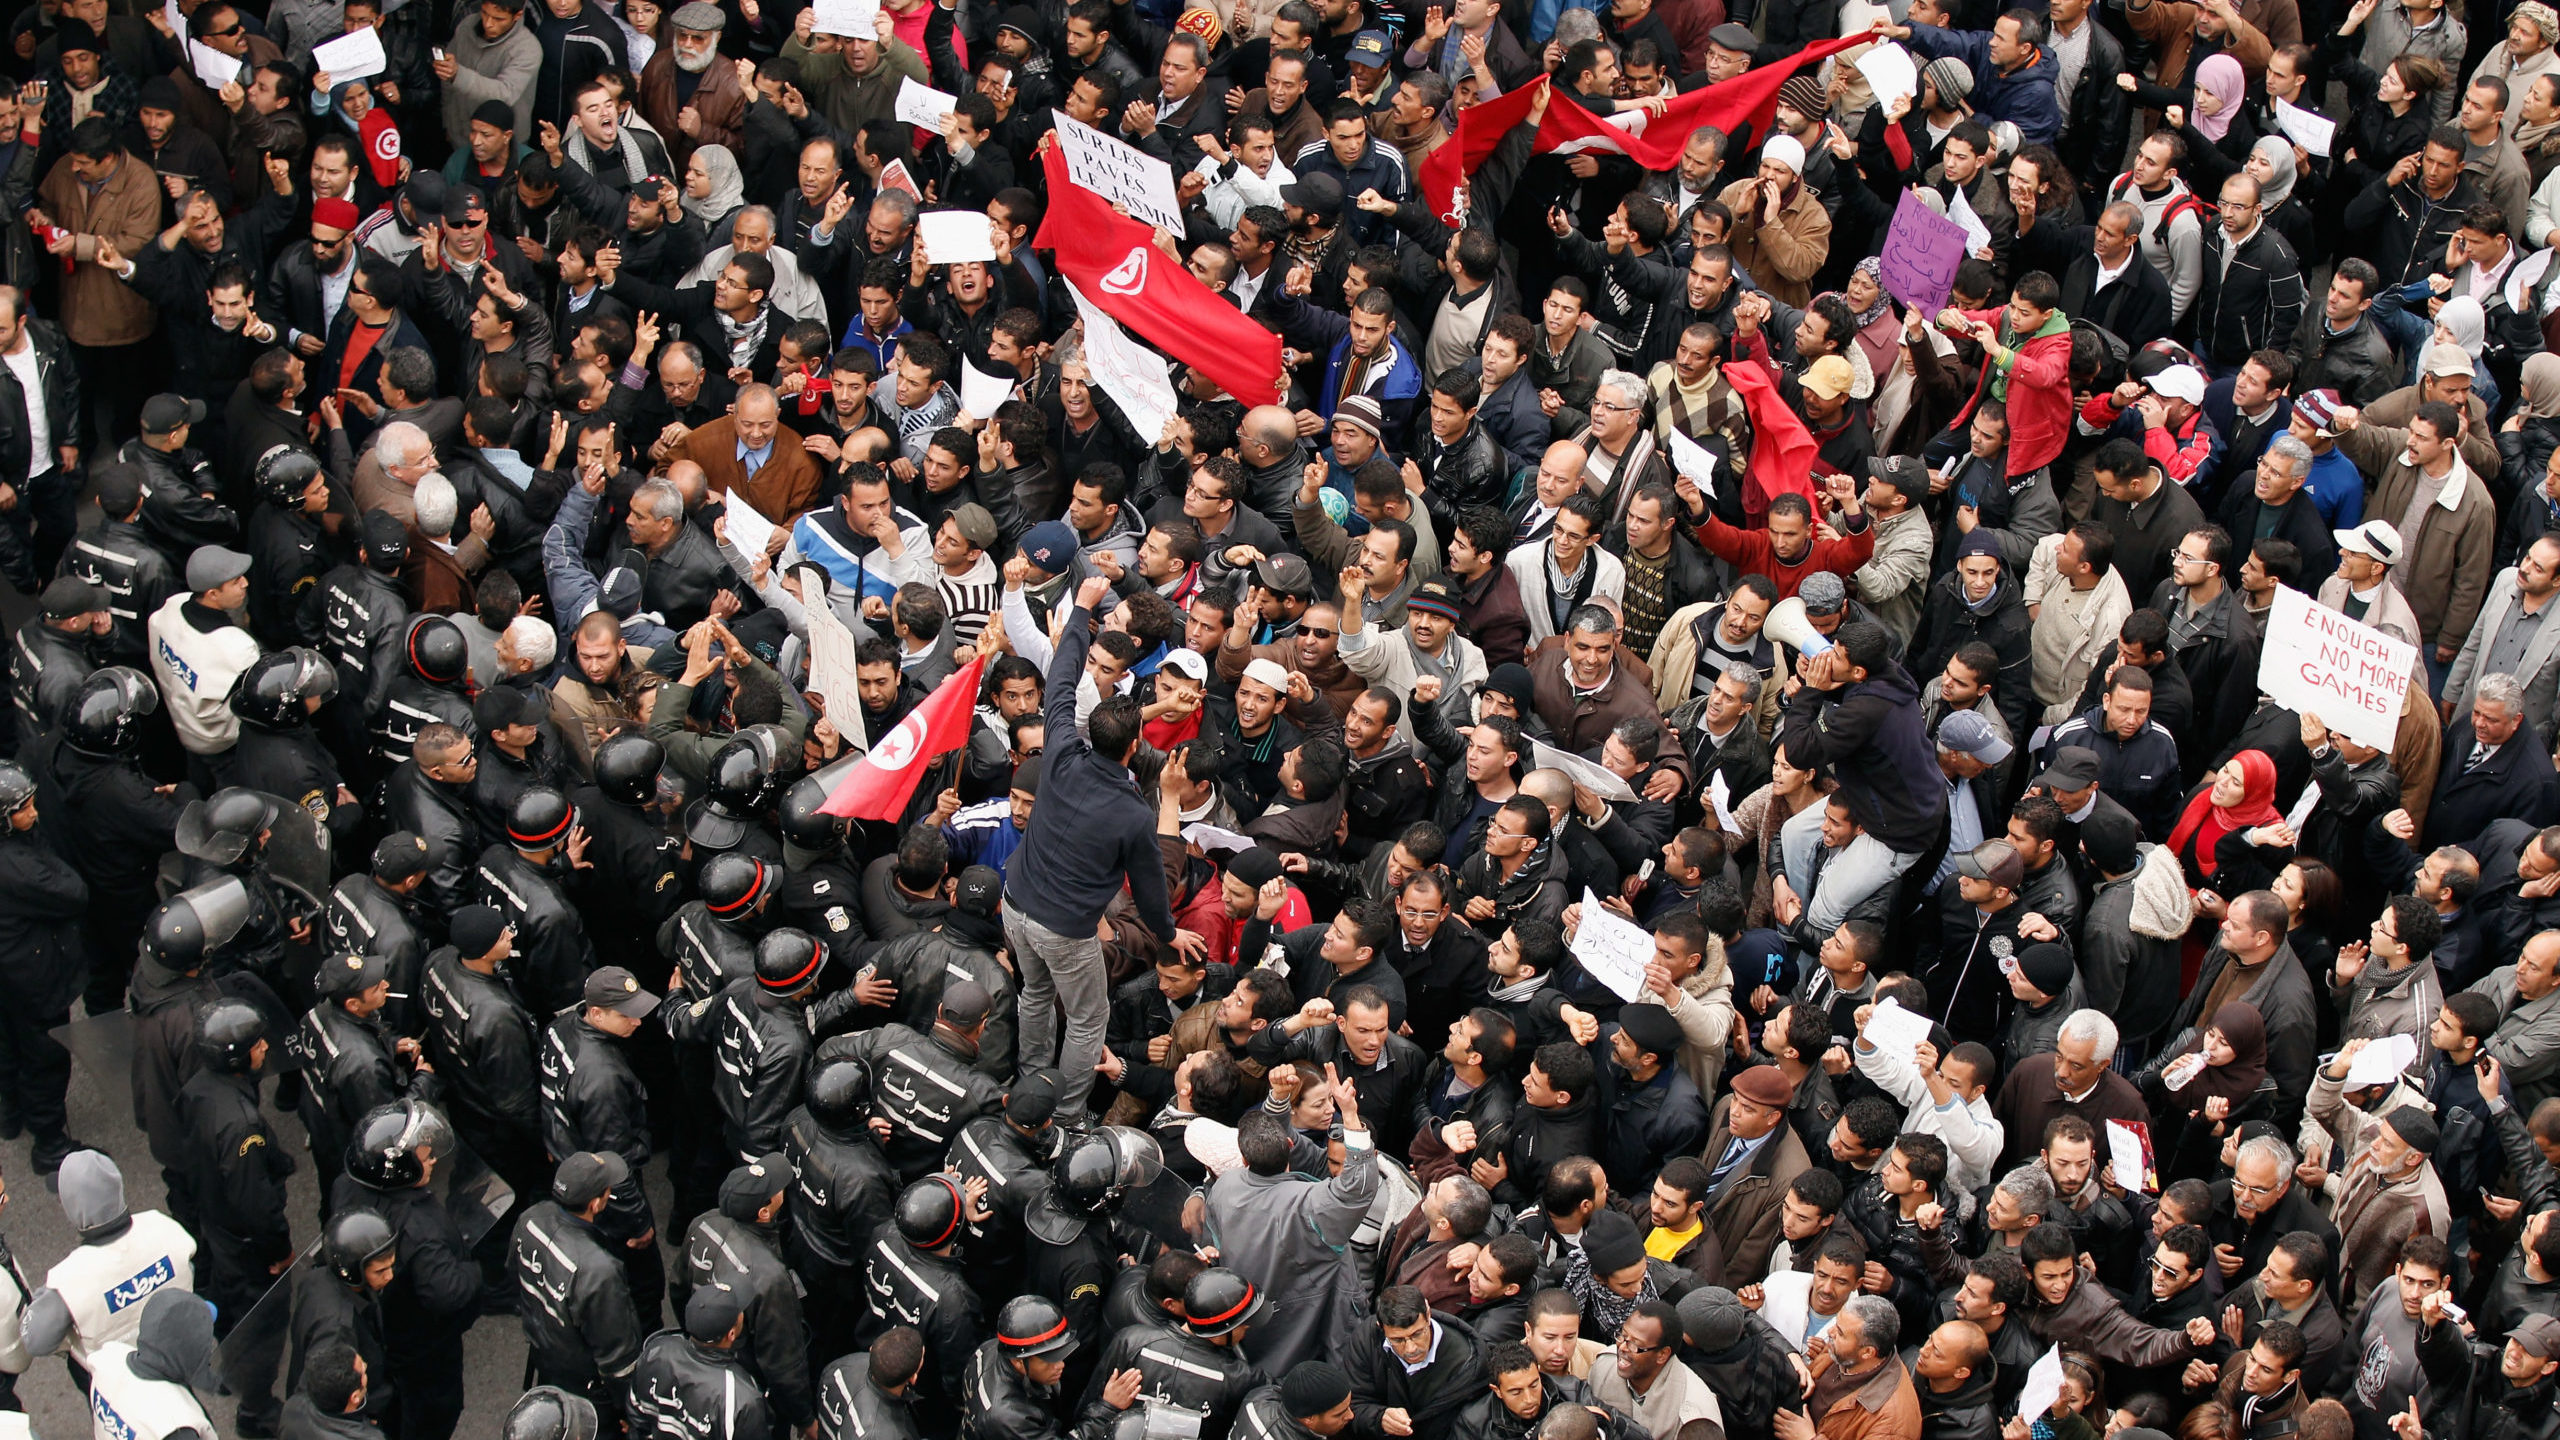 The Arab Spring: A Rendezvous With Destiny and Unfulfilled Dreams